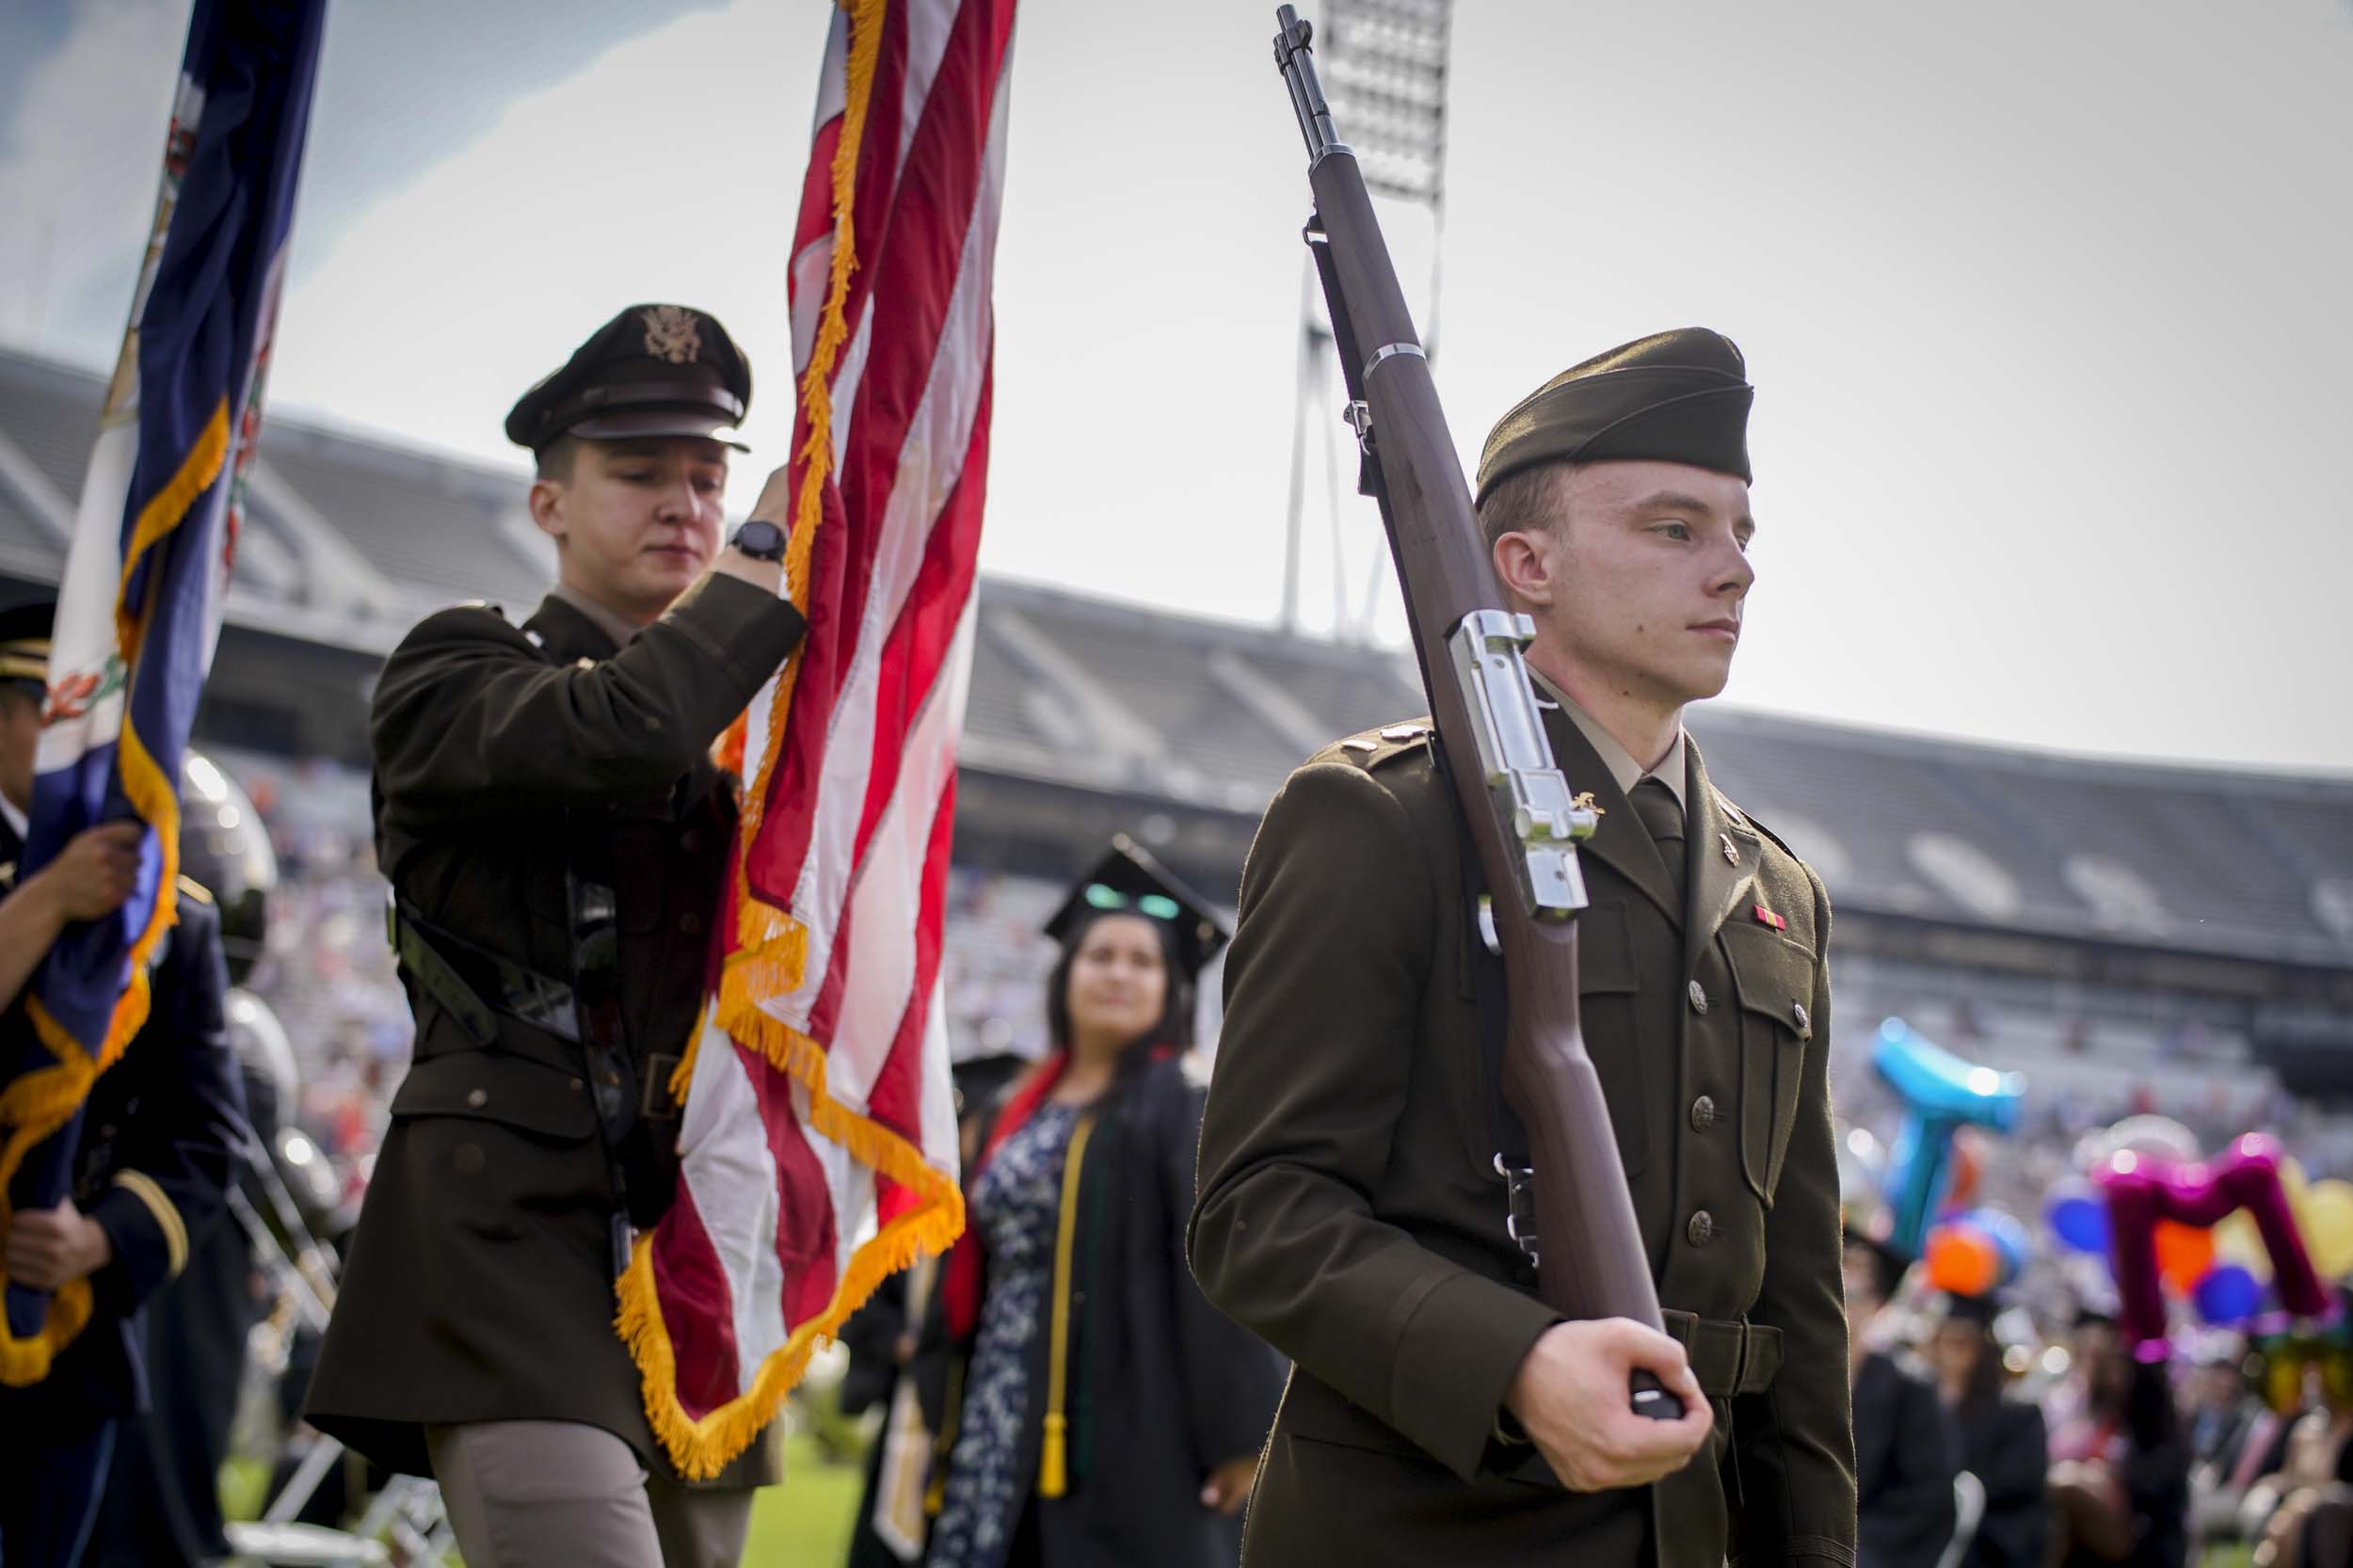 U.S. Color Guard walking in left to right: Color Guardsmen carrying the Virginia state flag, Color Guardsman carrying the United States of America Flag, Color Guardsman carrying a rifle on their right shoulder